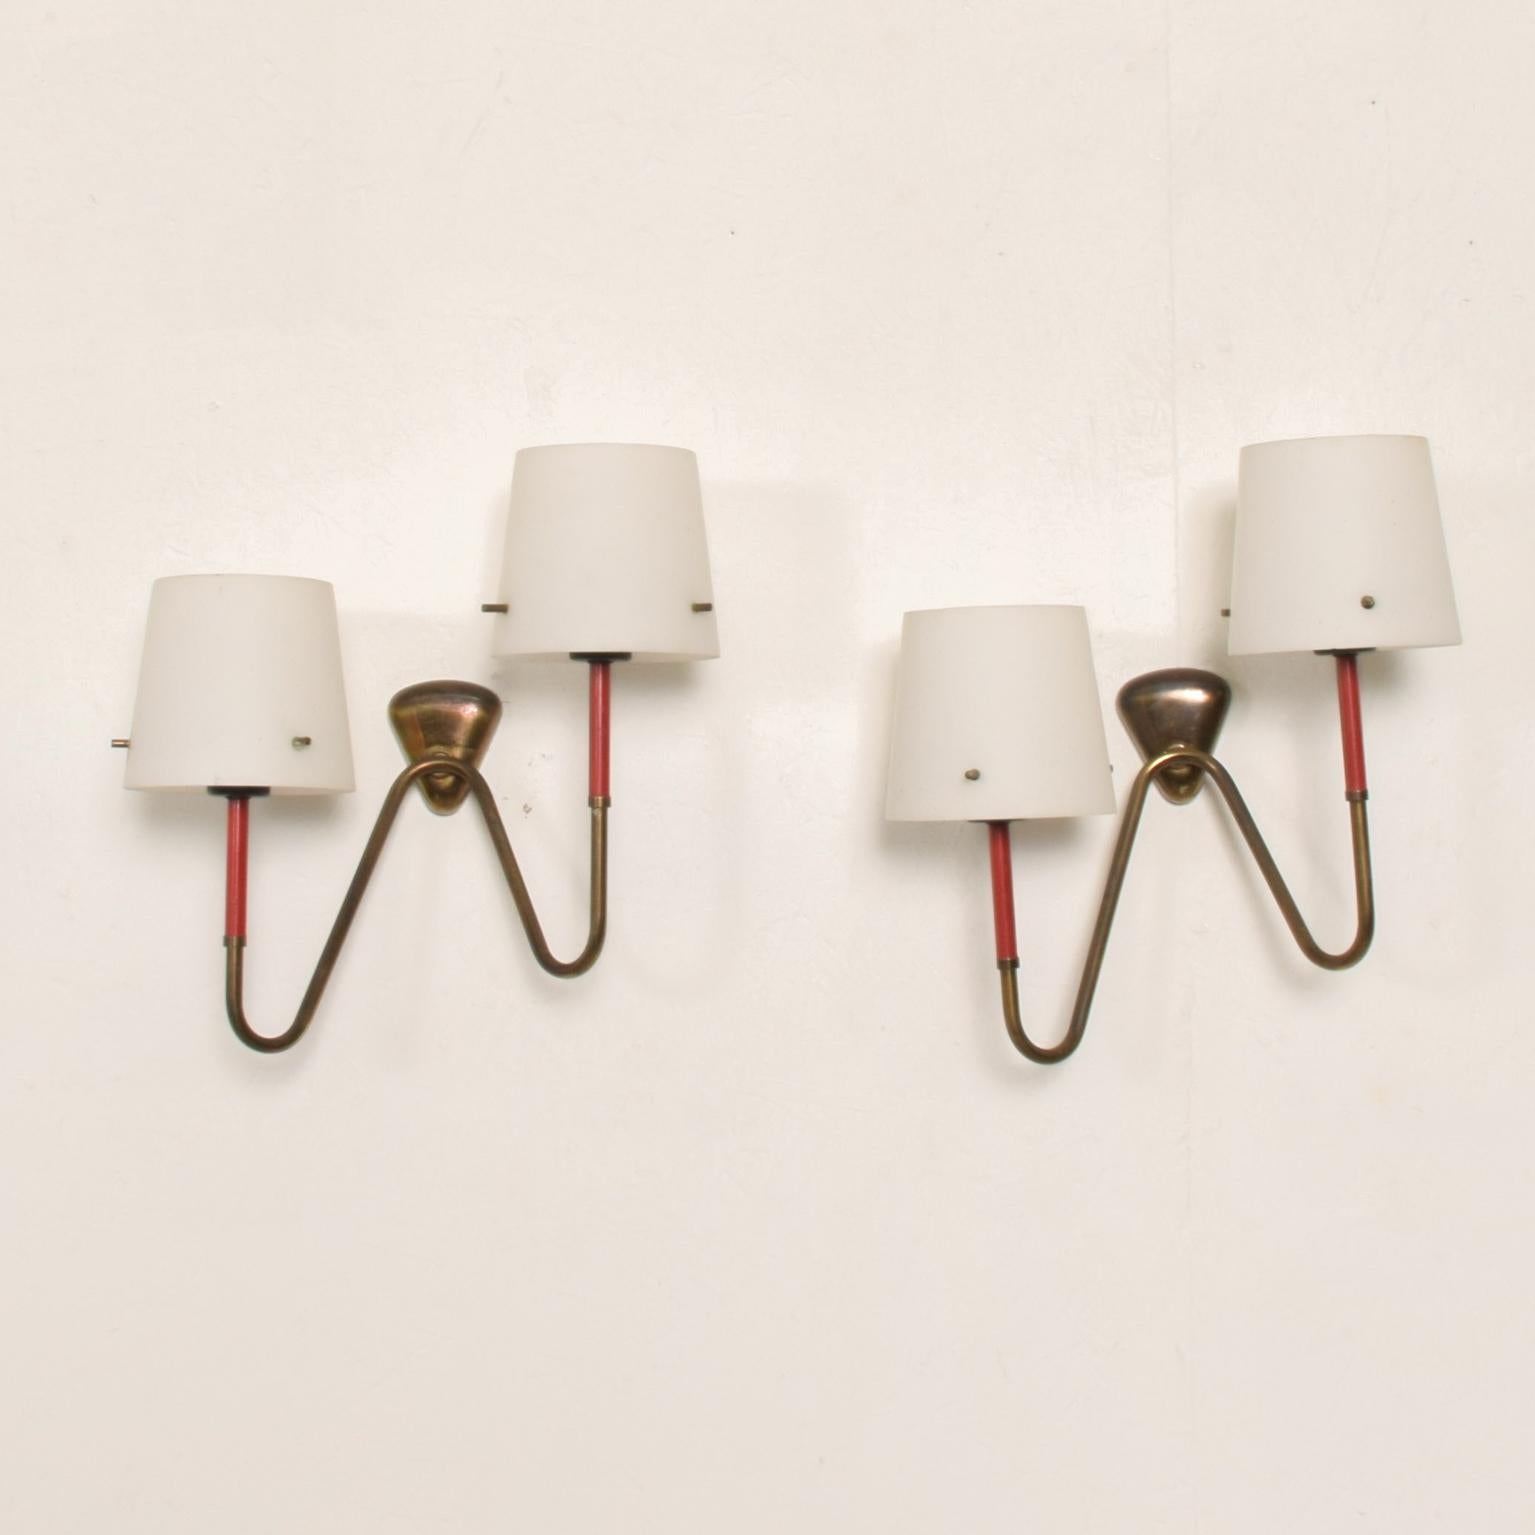 Gio Ponti style of Italian 1950s 2 light wall sconce, pair.
Sculptural brass body with splash of red! glass opaline shades.
It requires 2 E-14 bulb per sconce.
Unmarked. Attributed style of Gio Ponti
Dimensions:12 1/2